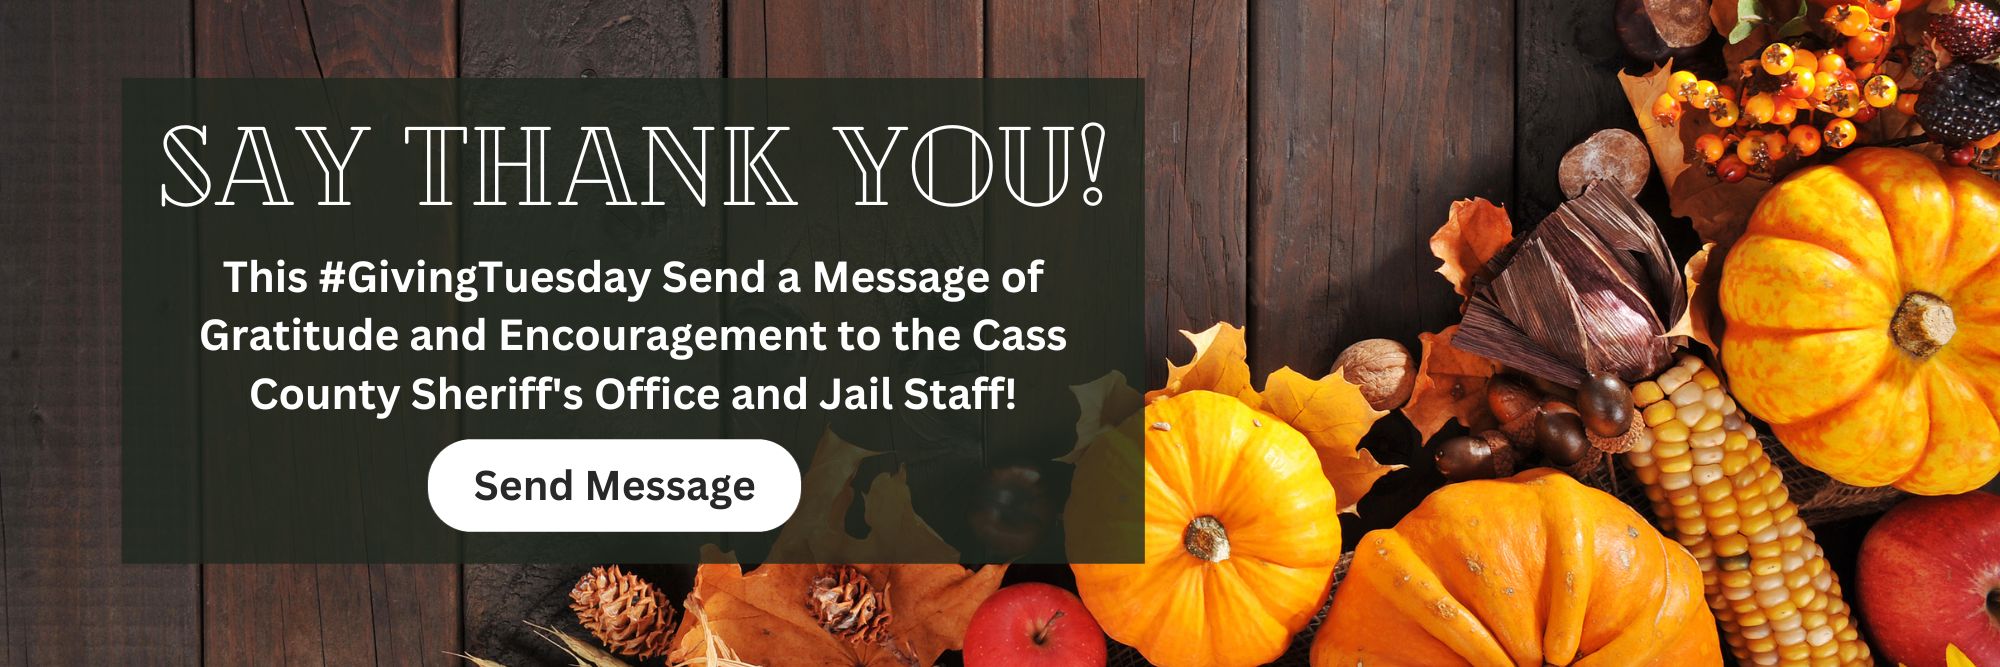 This #GivingTuesday Send a Message of Gratitude and Encouragement to the Cass County Sheriff's Office and Jail Staff